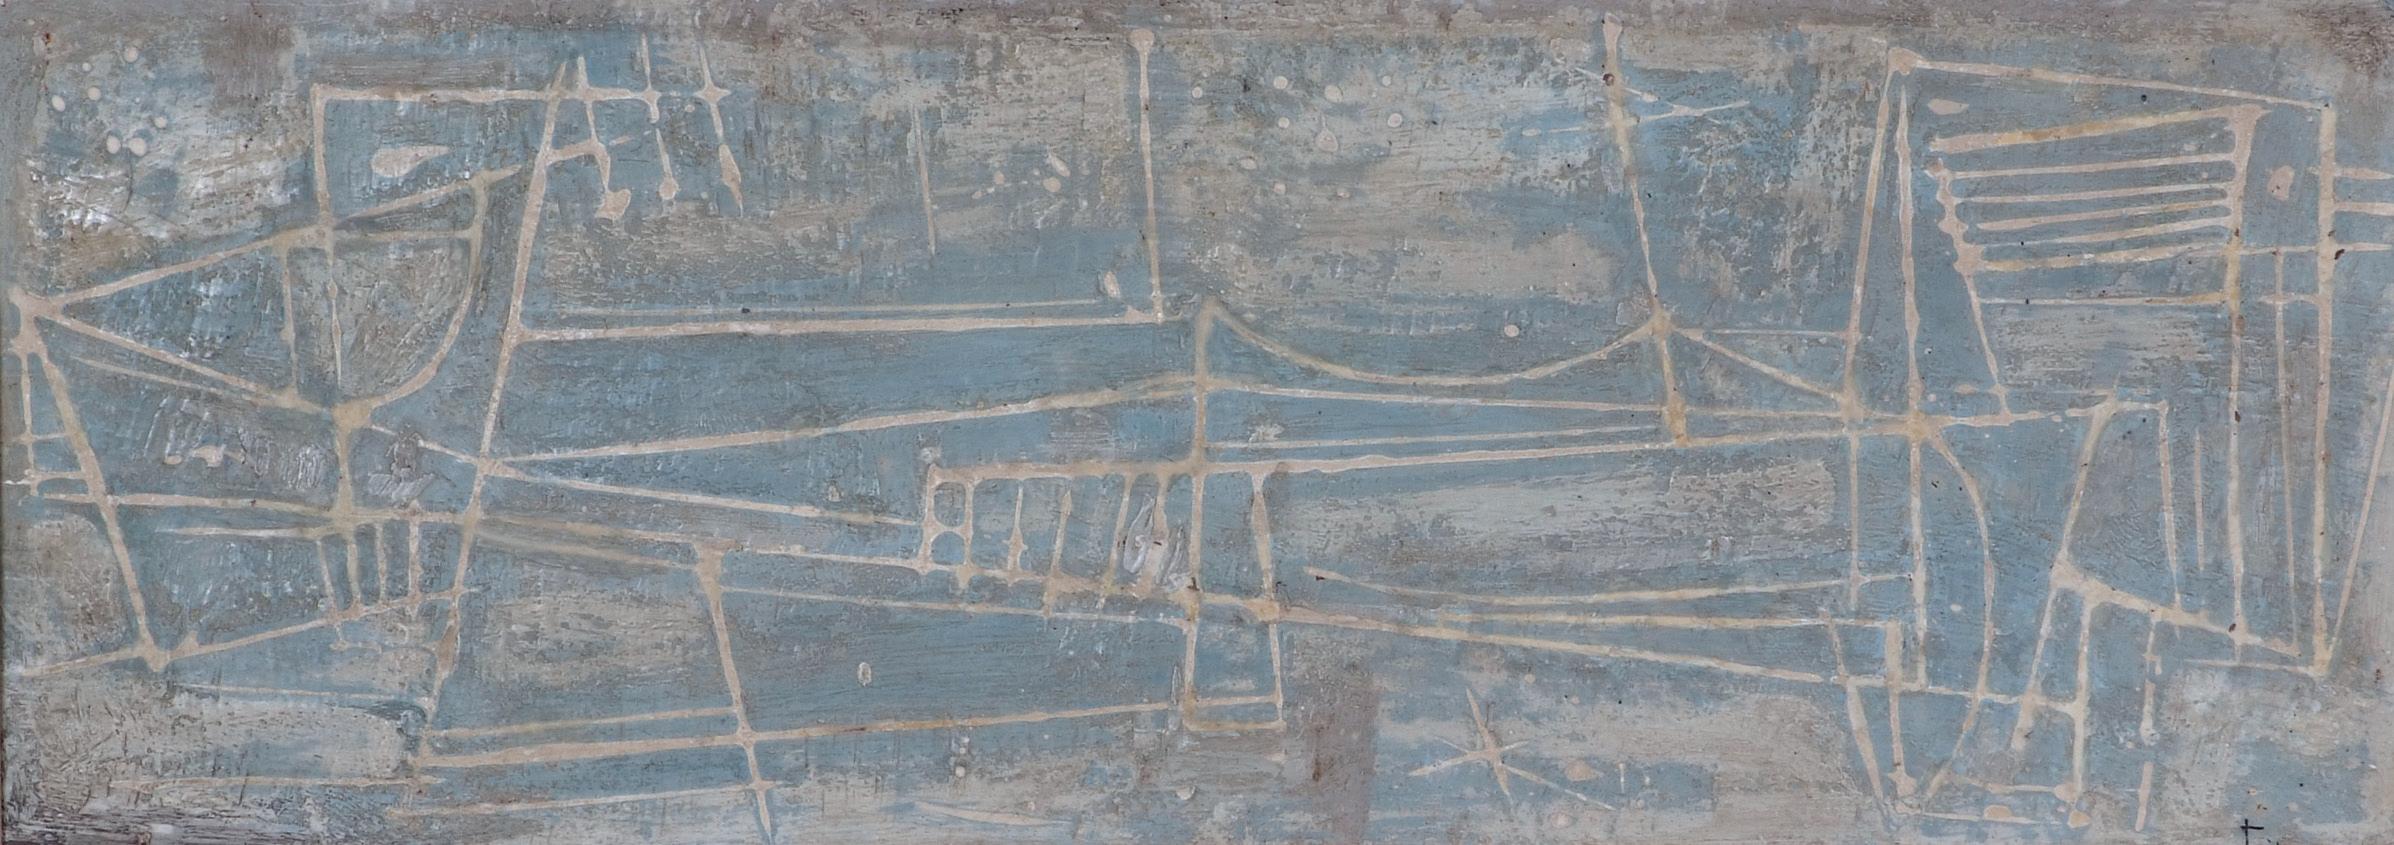 Luis Feito López Abstract Painting - Abstract Lines Space Feito Early Scratched Blue Horizontal Frieze Primitive